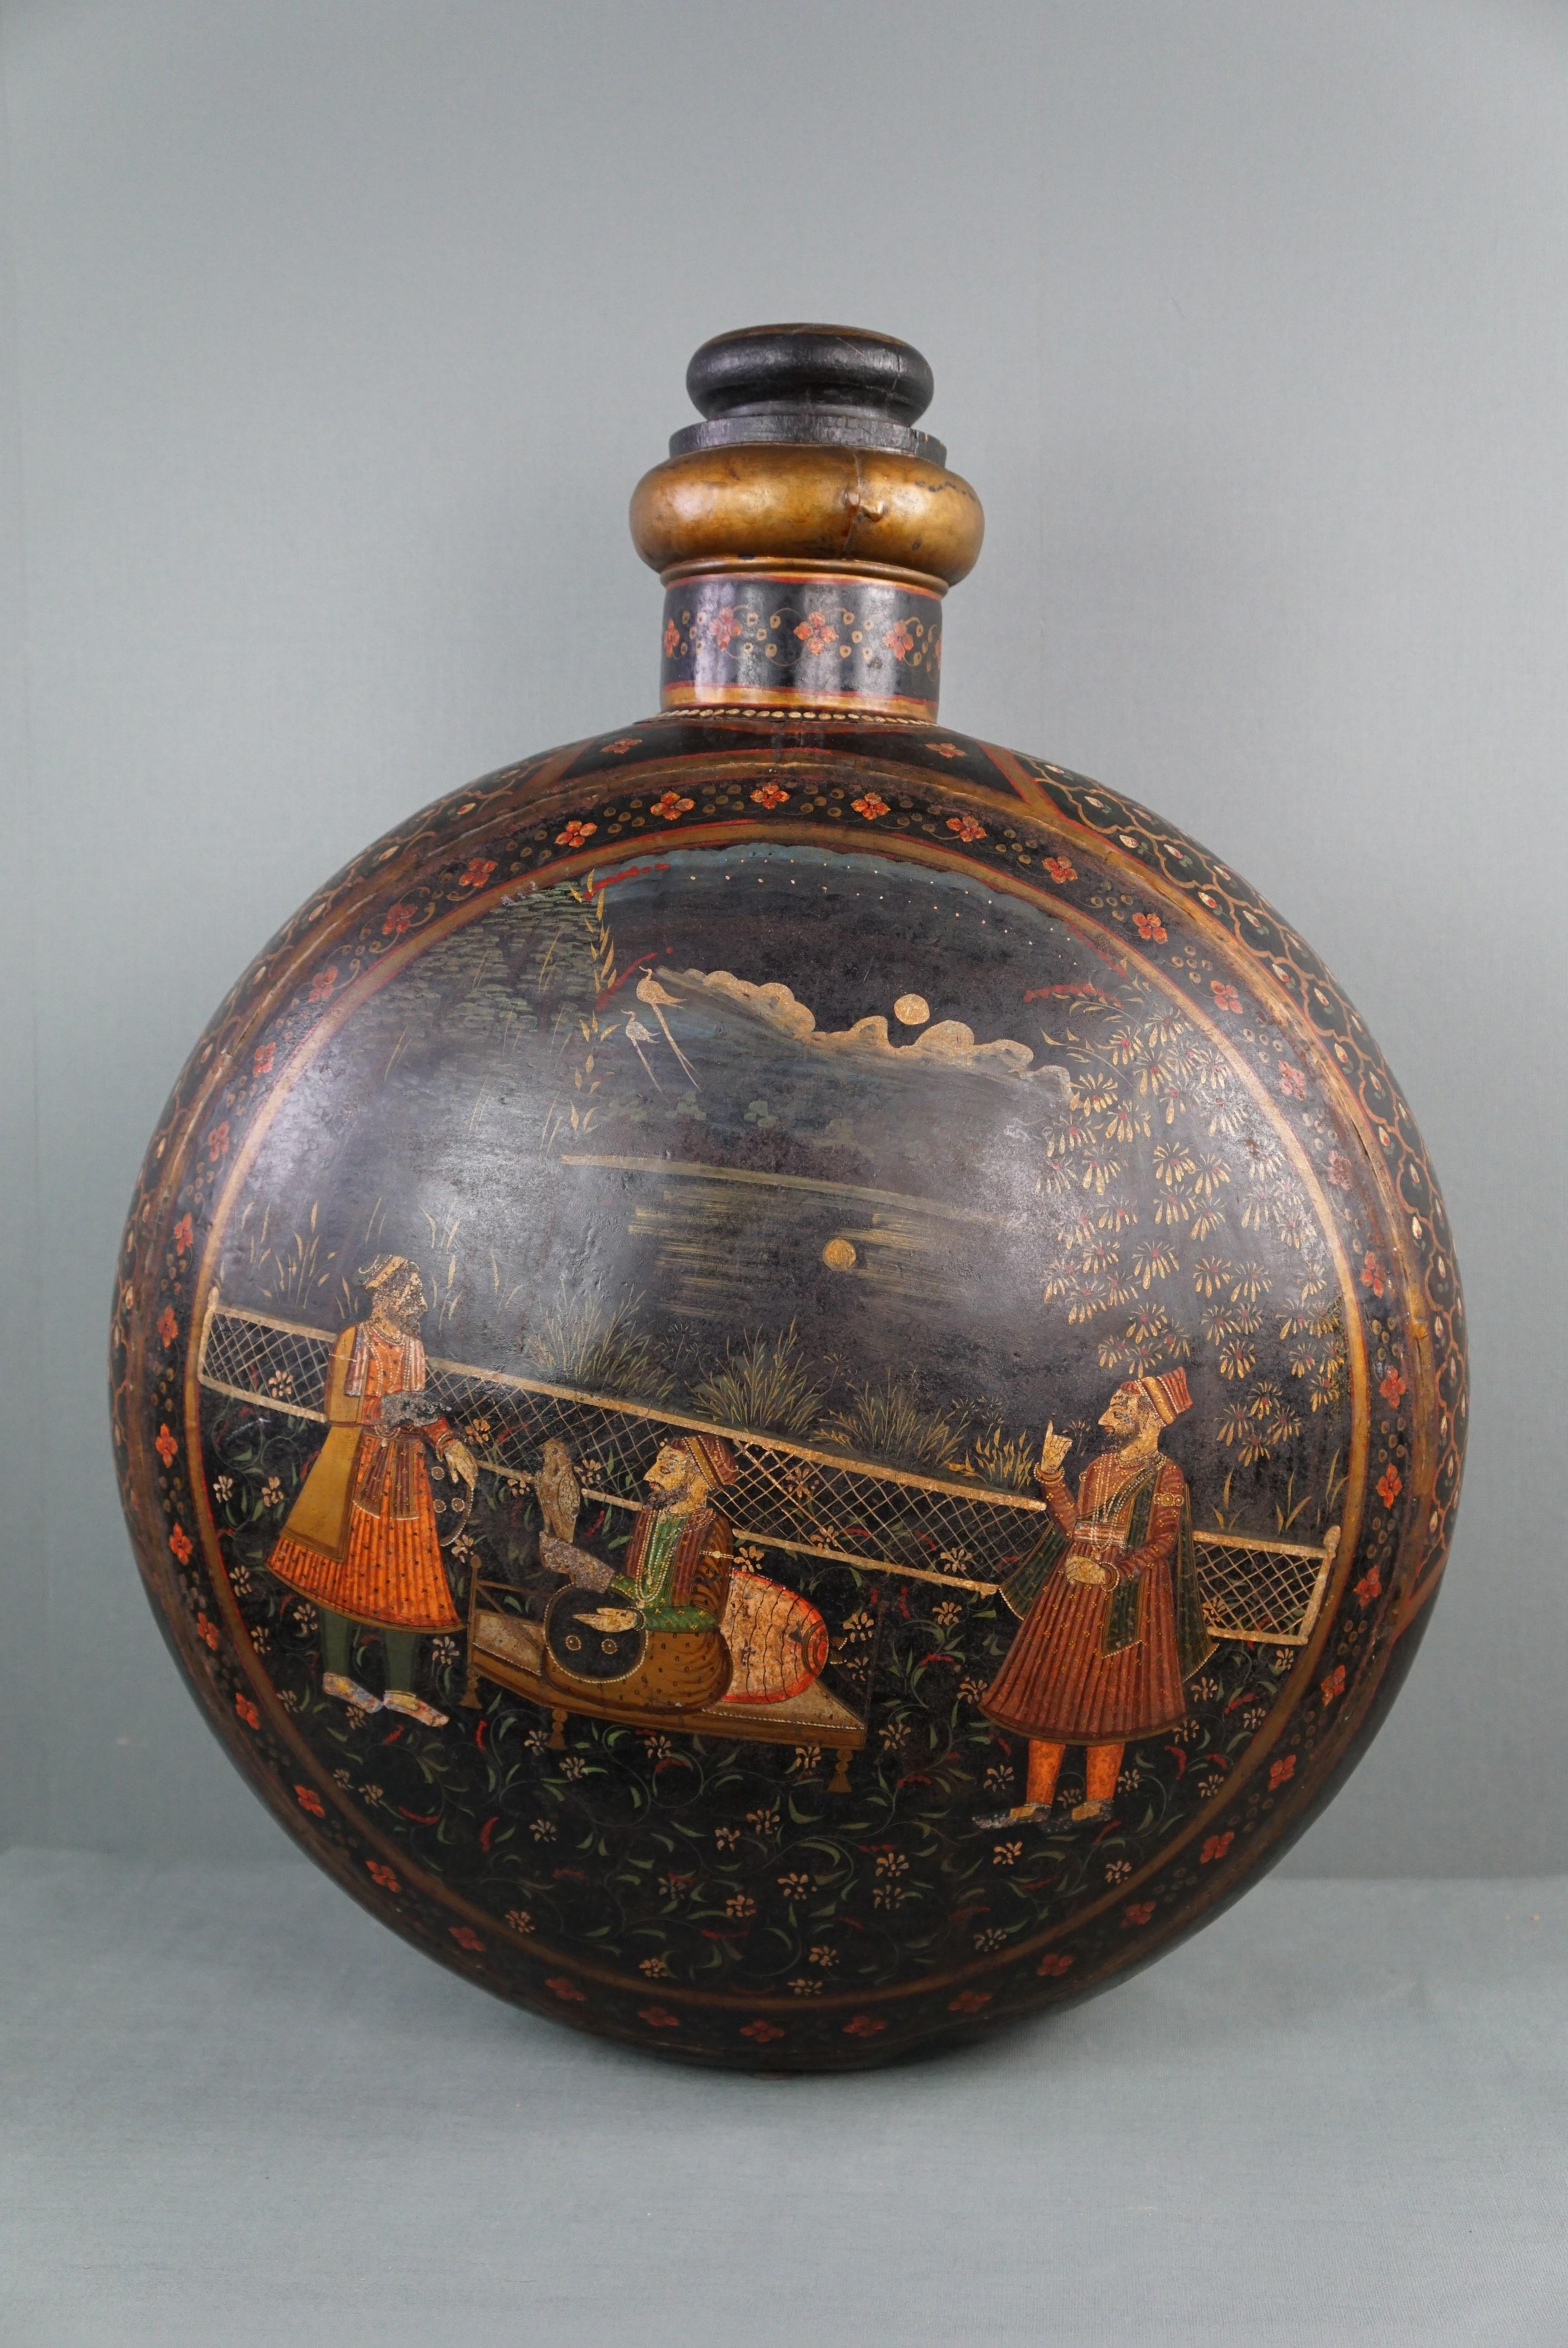 Offered is this beautiful and very large antique early 20th century hand-painted Indian water vessel which, due to its decorations, size and details, is an asset to many interiors.

This large painted metal vessel is decorated with polychrome